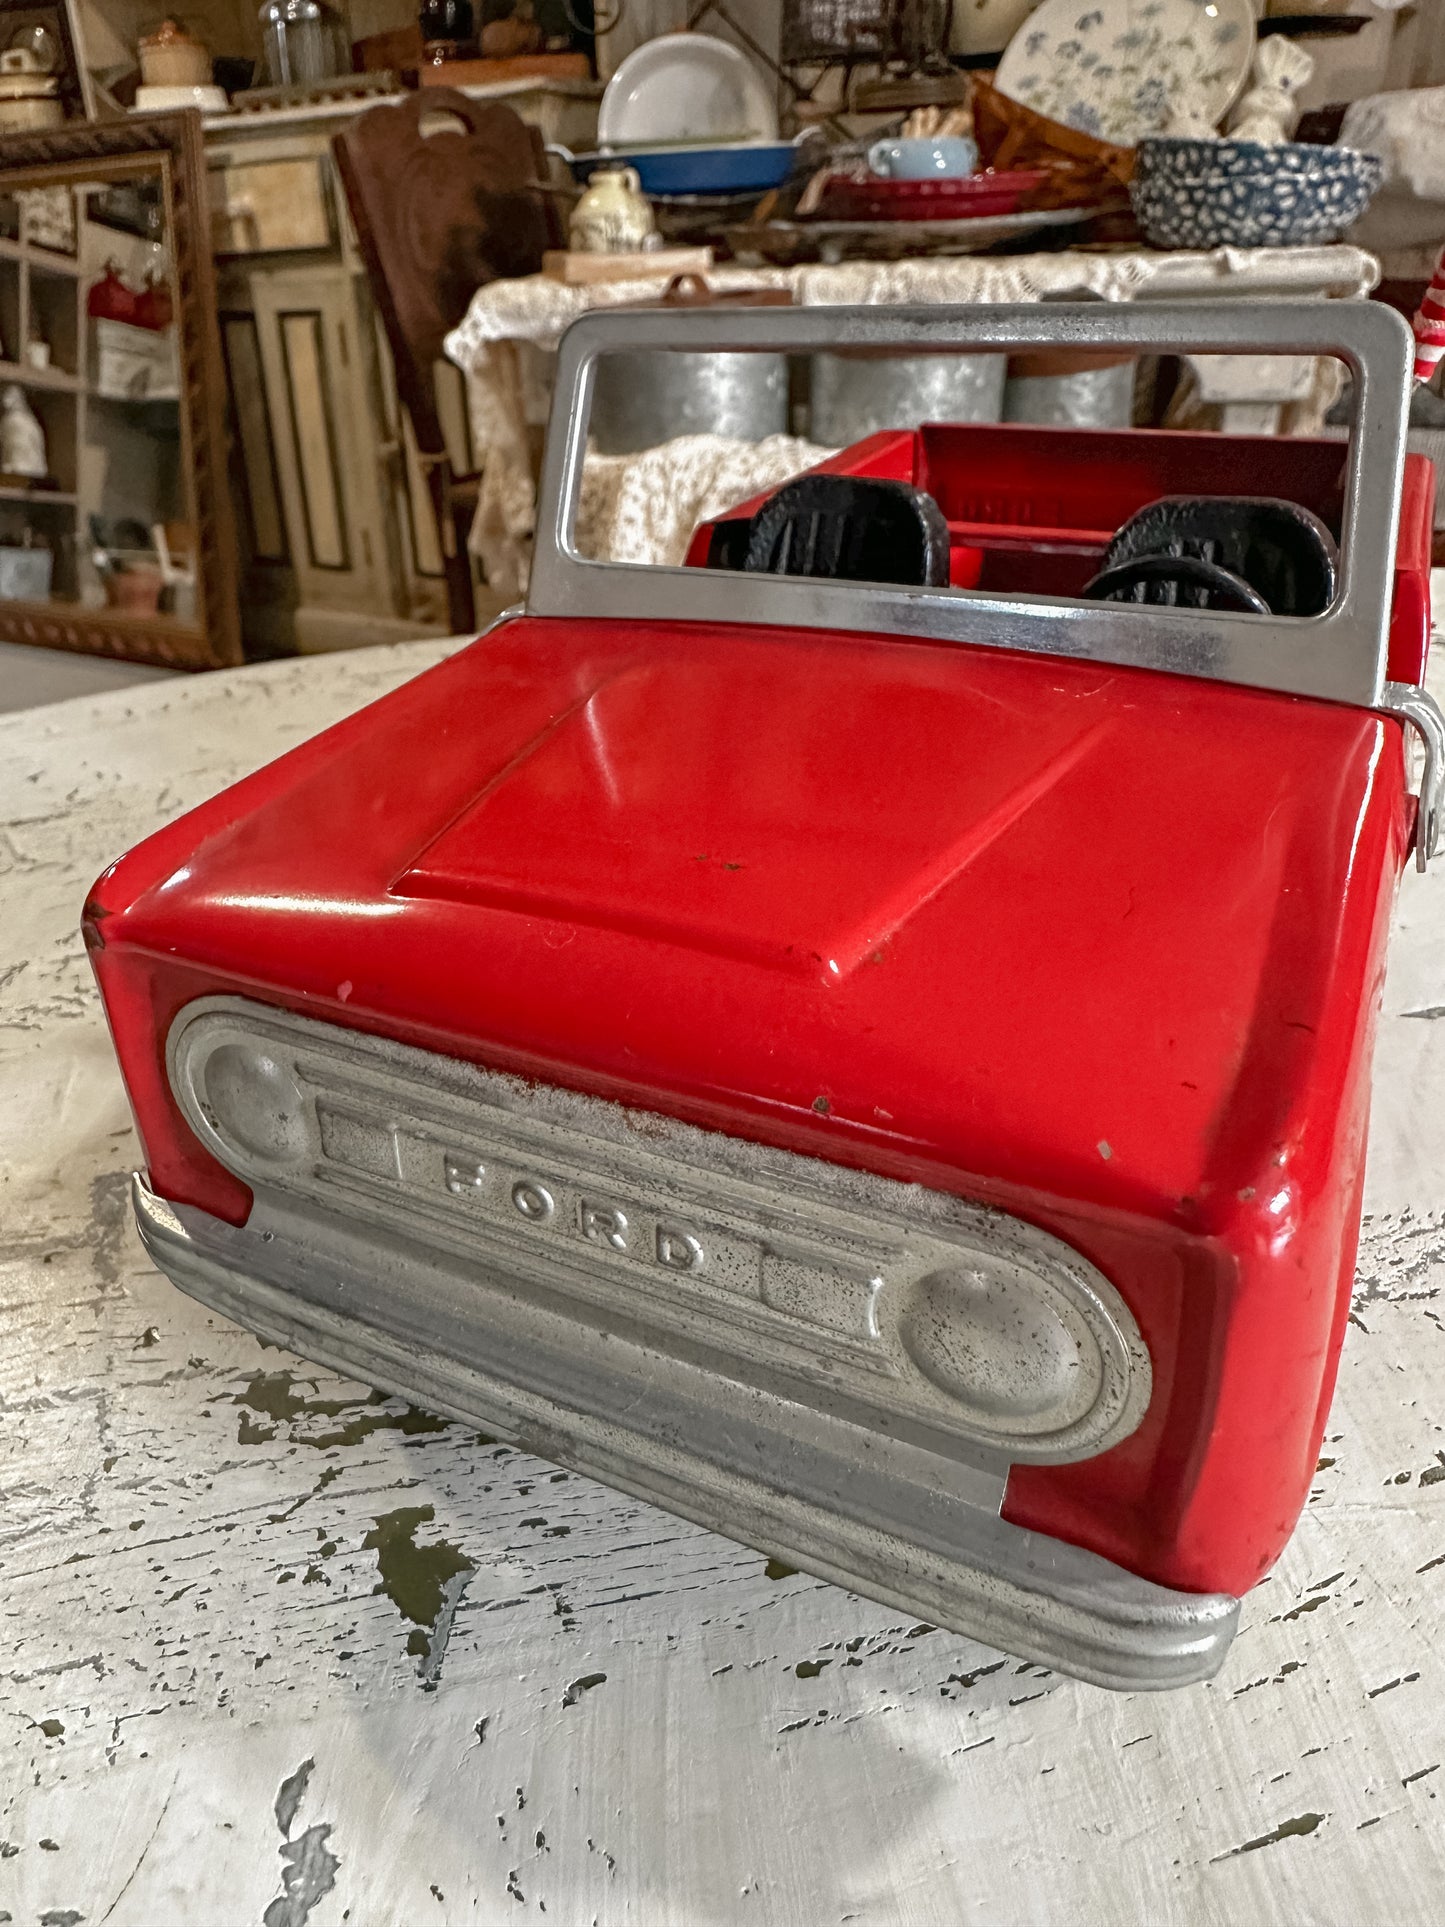 Amazing Vintage 1960's Nylint Ford Bronco pressed steel truck.